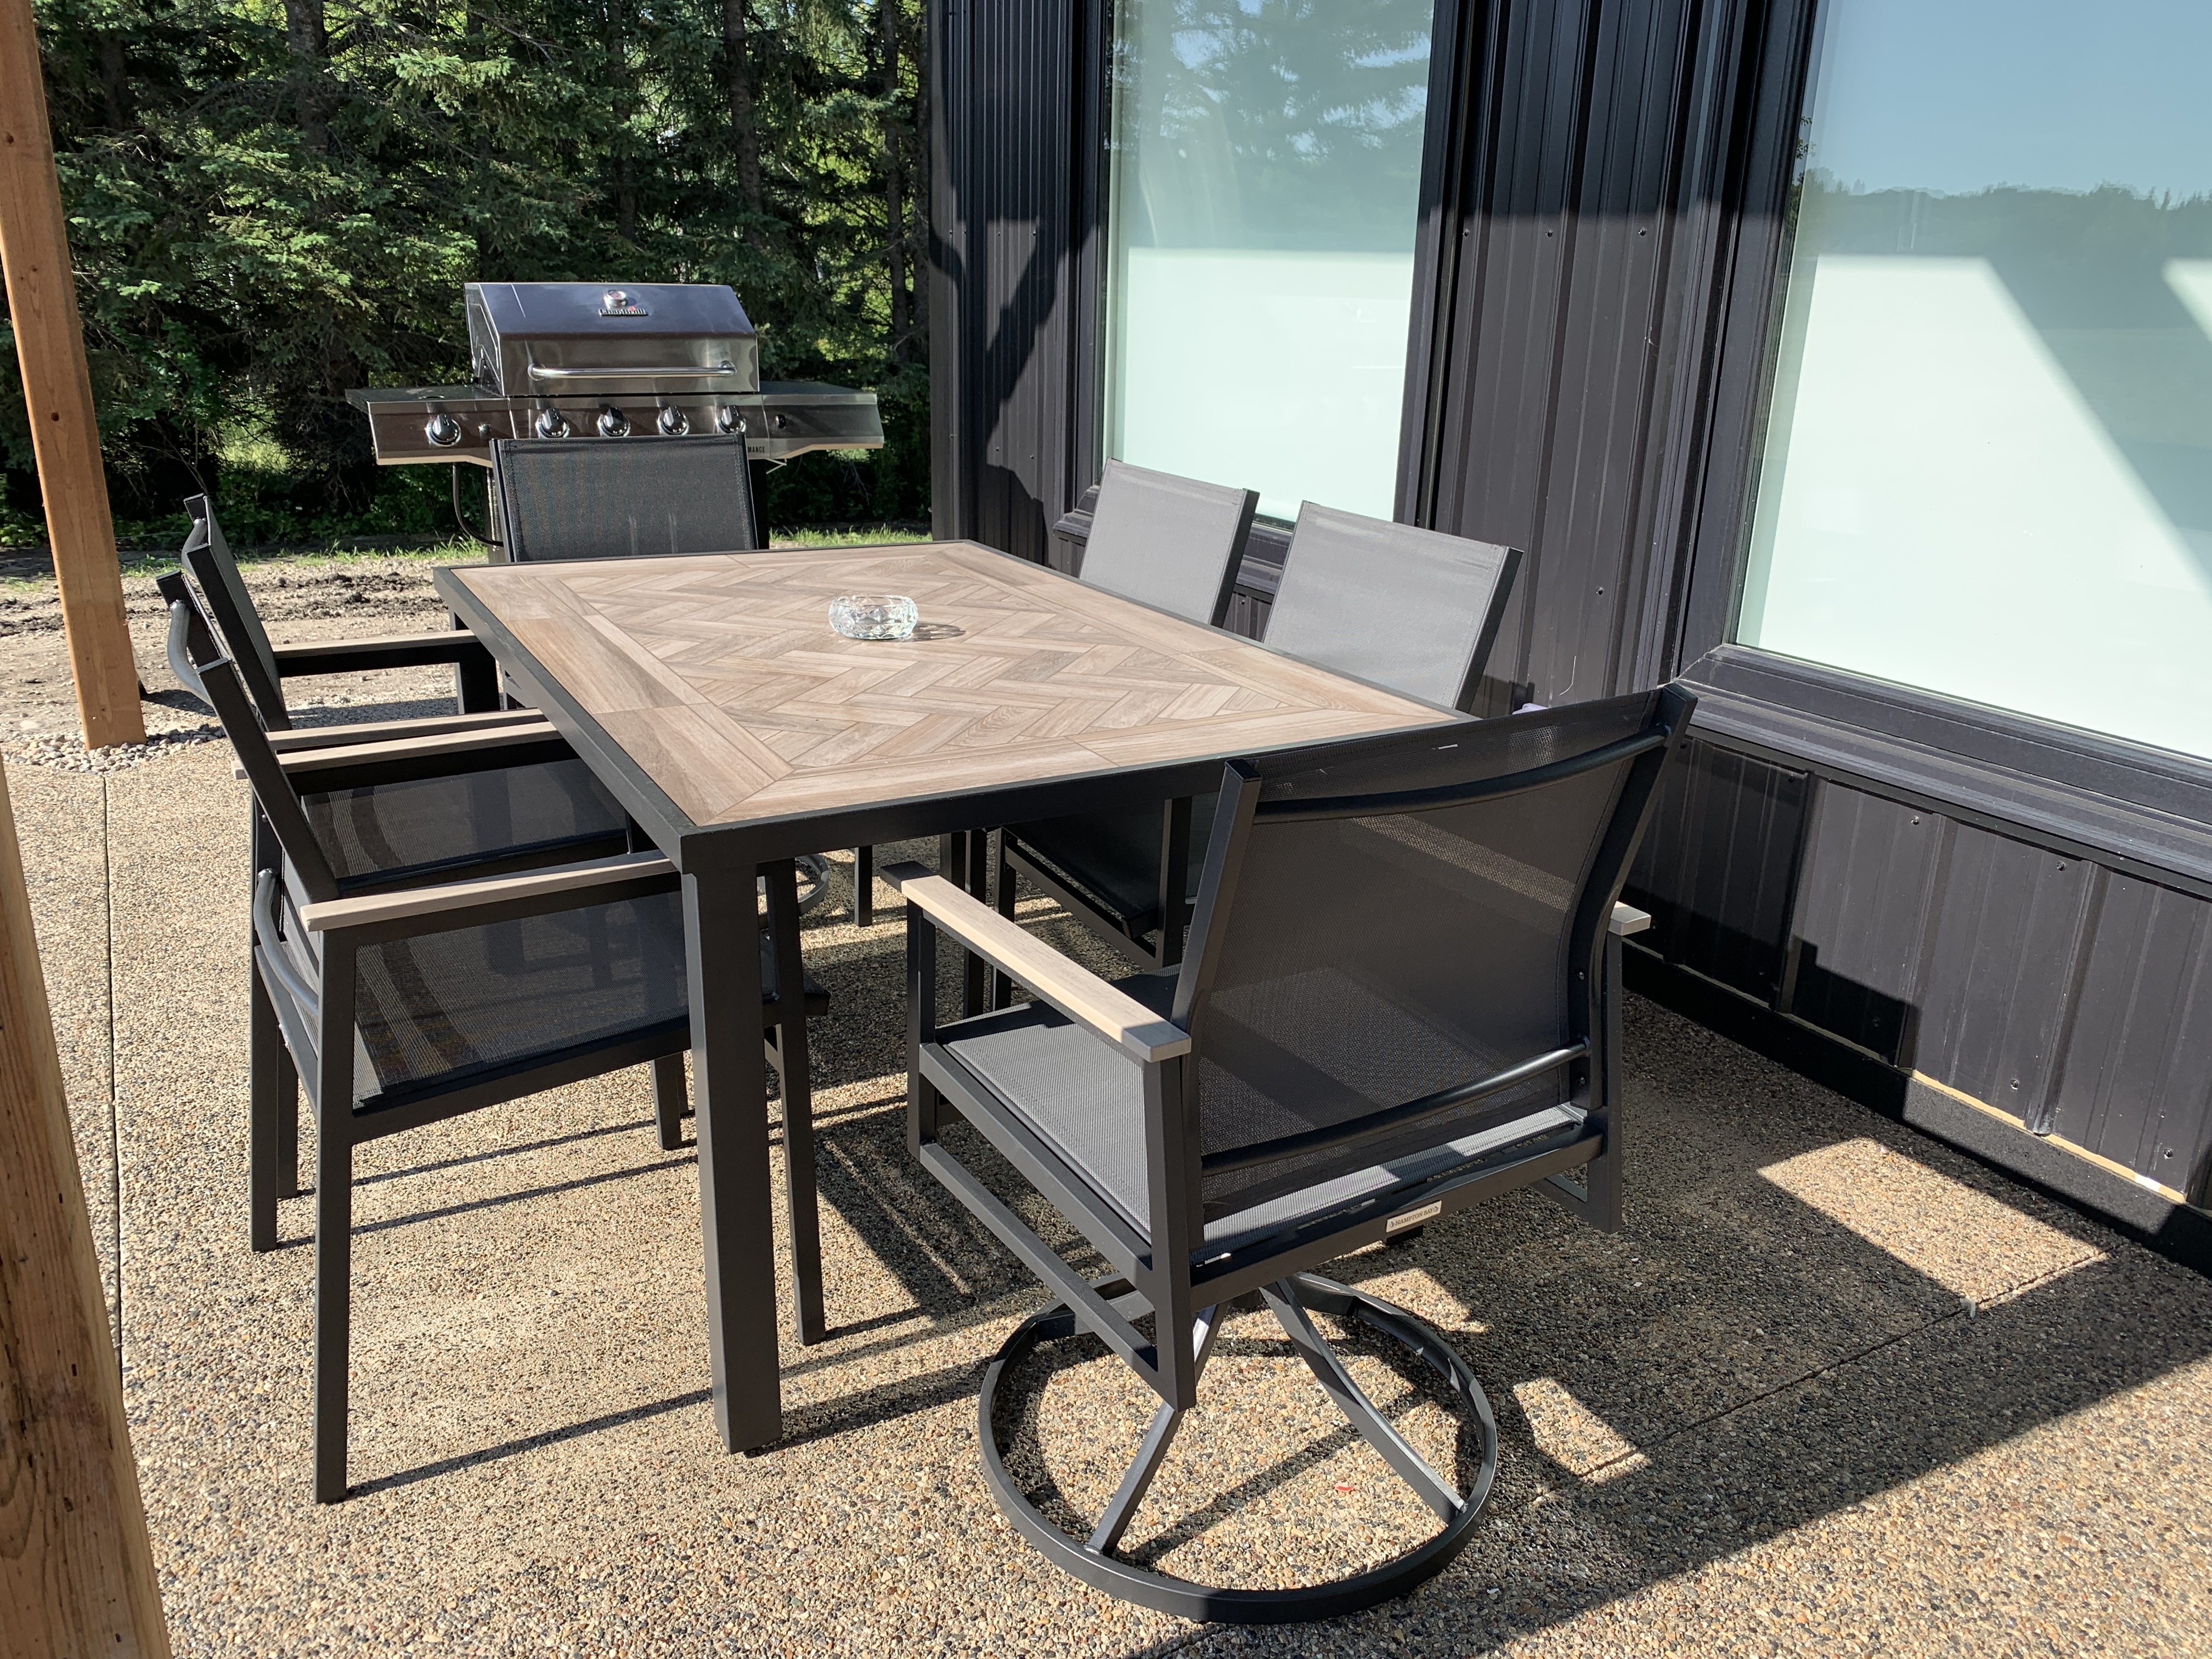 Outdoor Table / BBQ